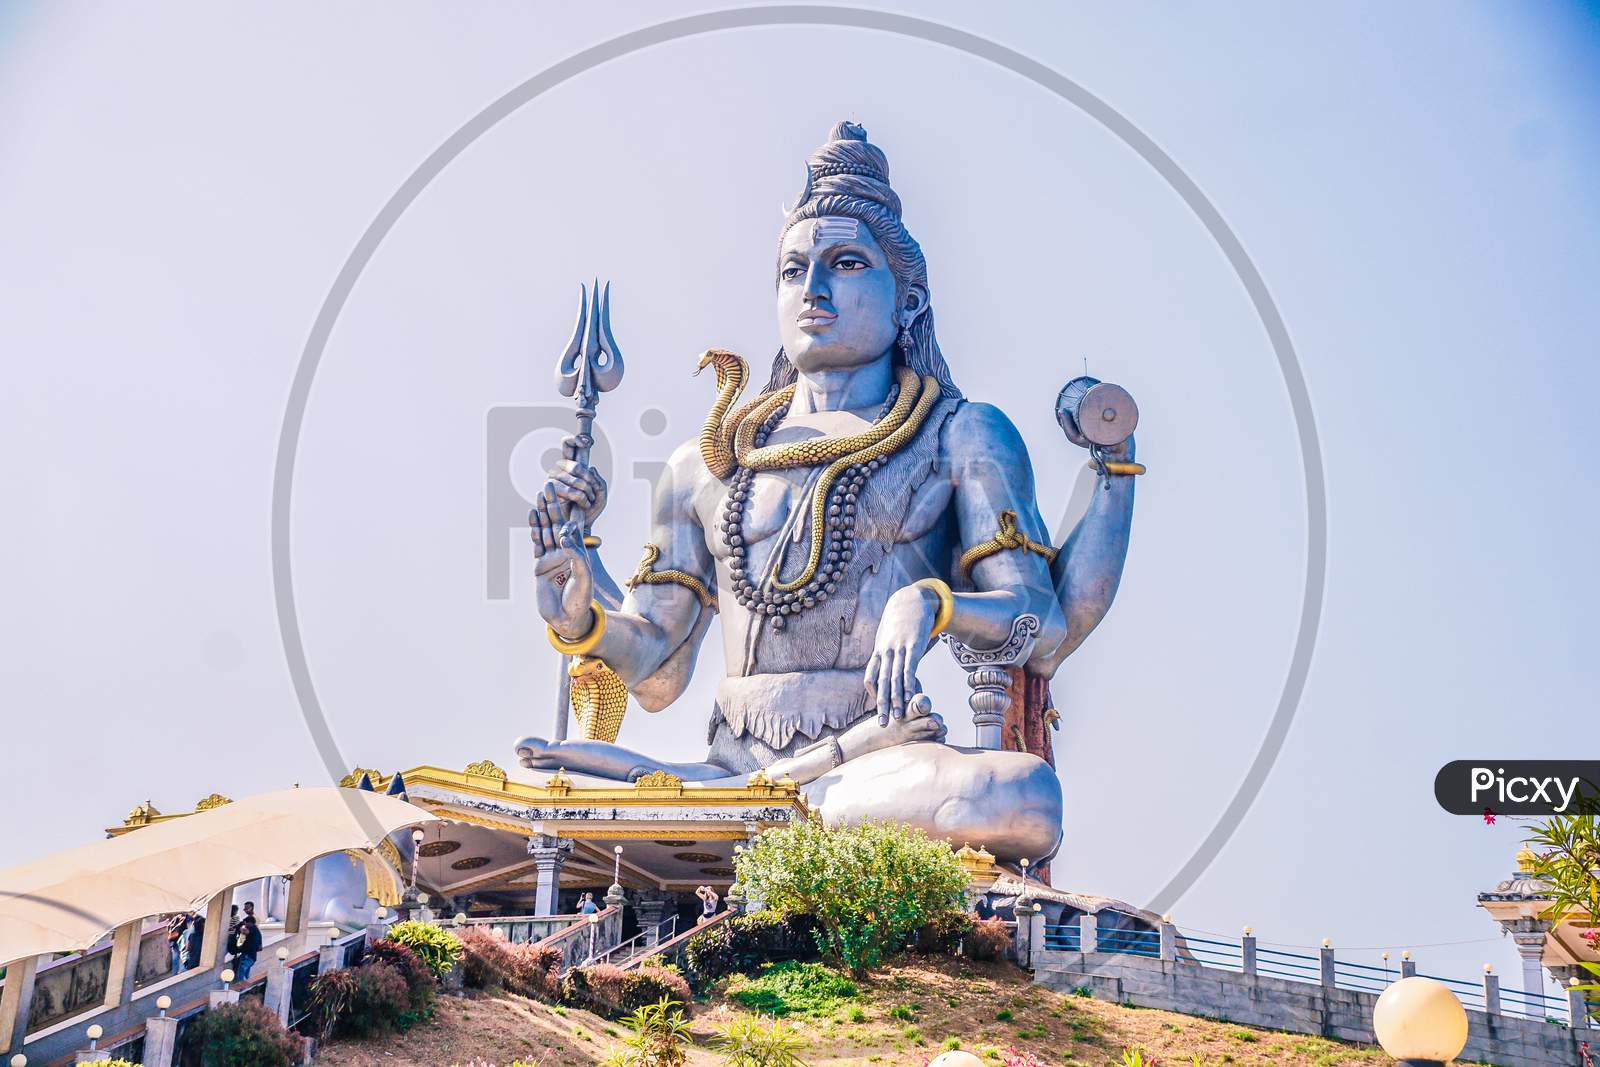 View of a giant Lord Shiva statue